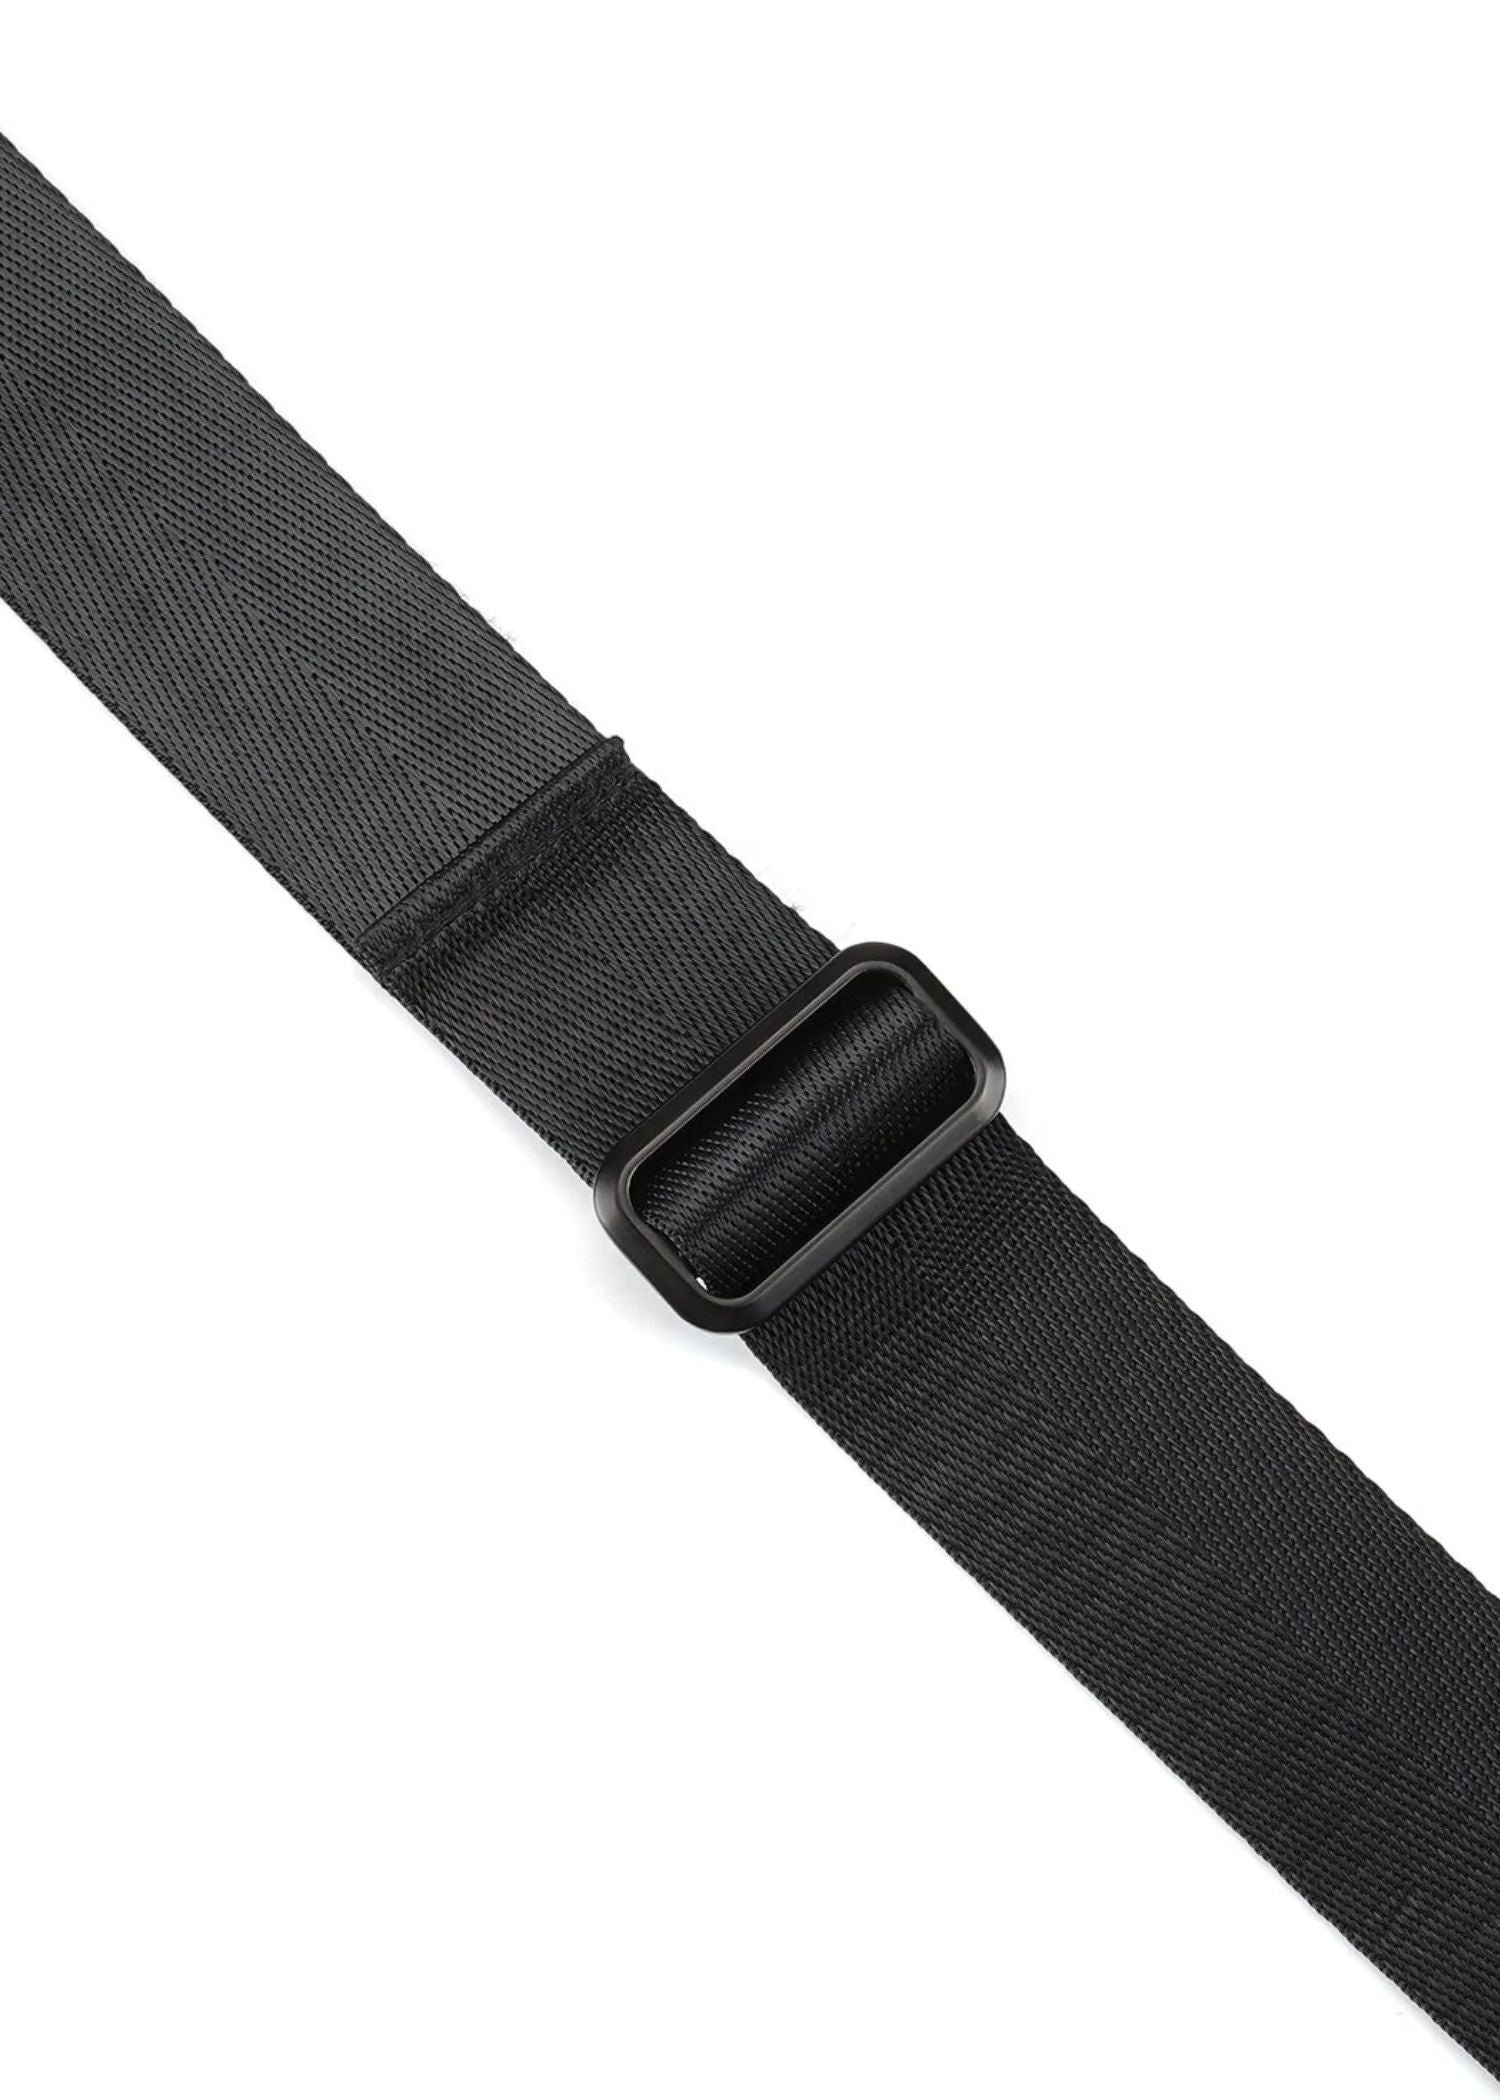 Liebe Seele Vegan Leather Wrist to Collar to Back Bands